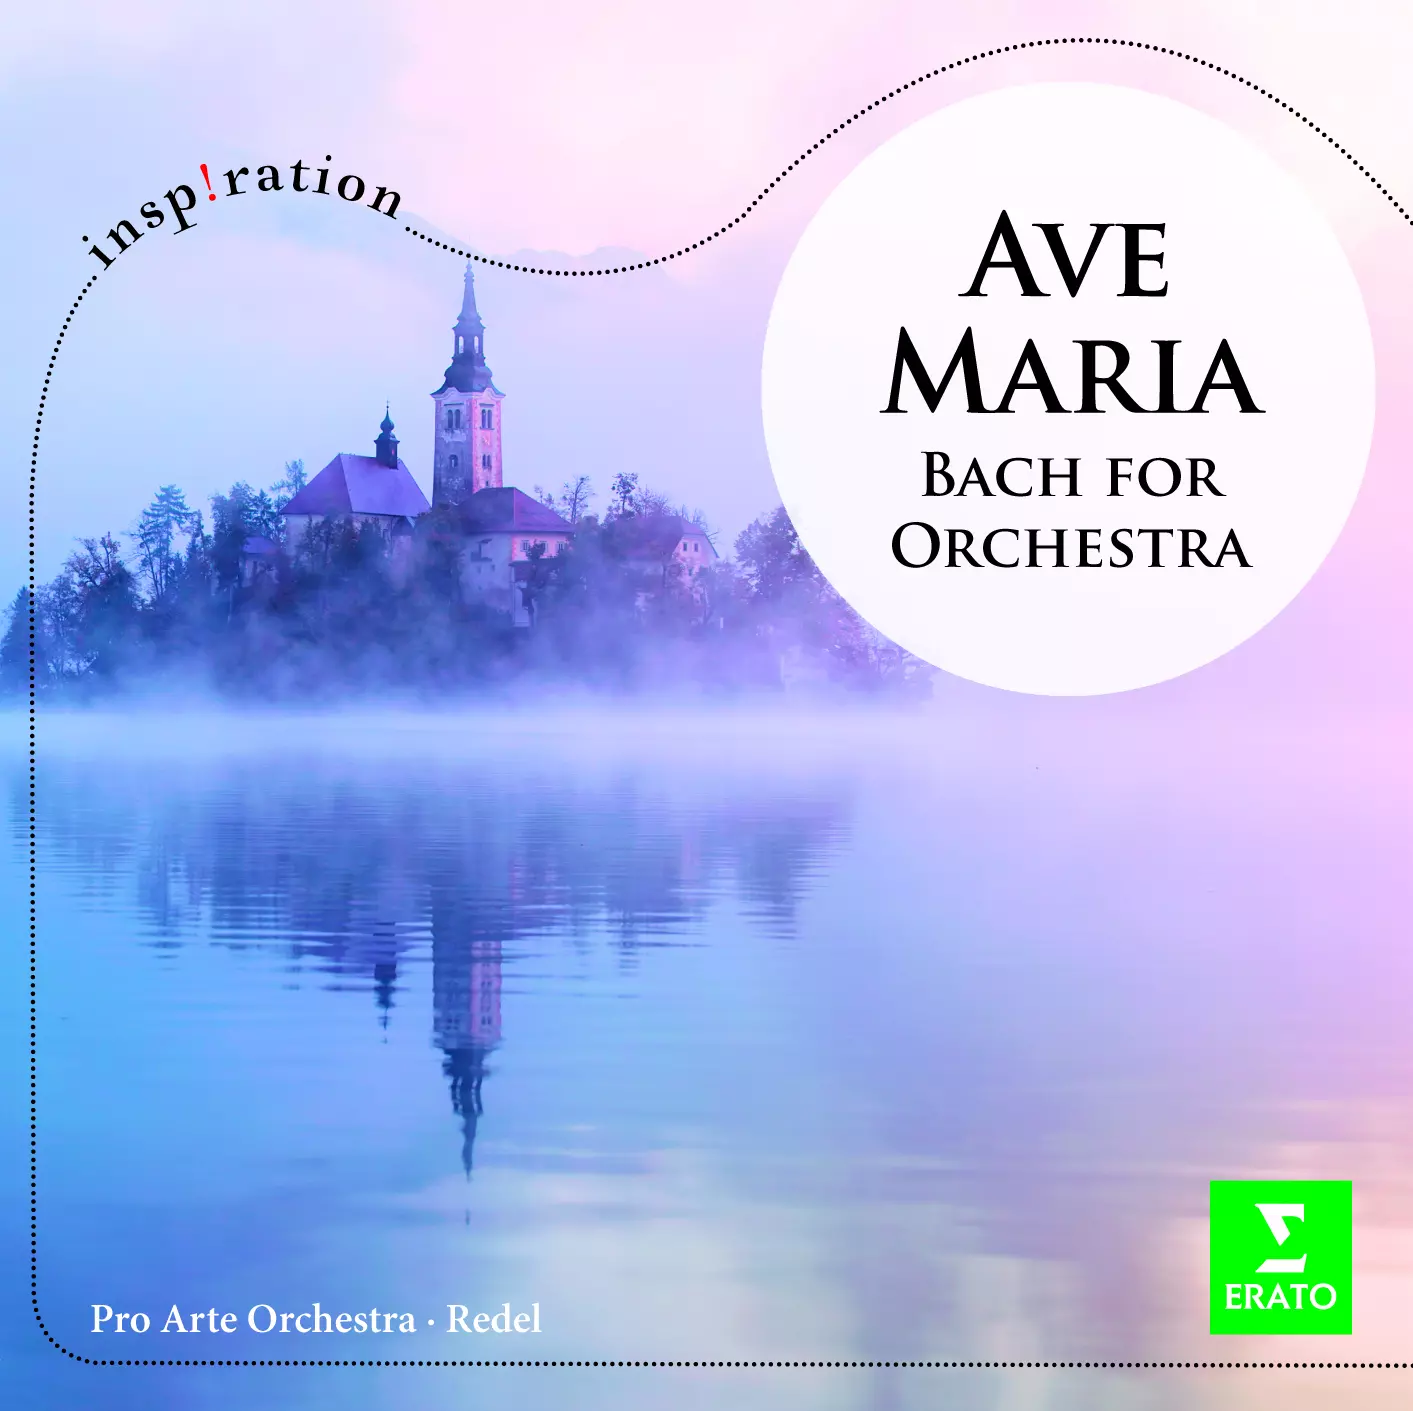 Ave Maria - Bach for Orchestra (Inspiration)